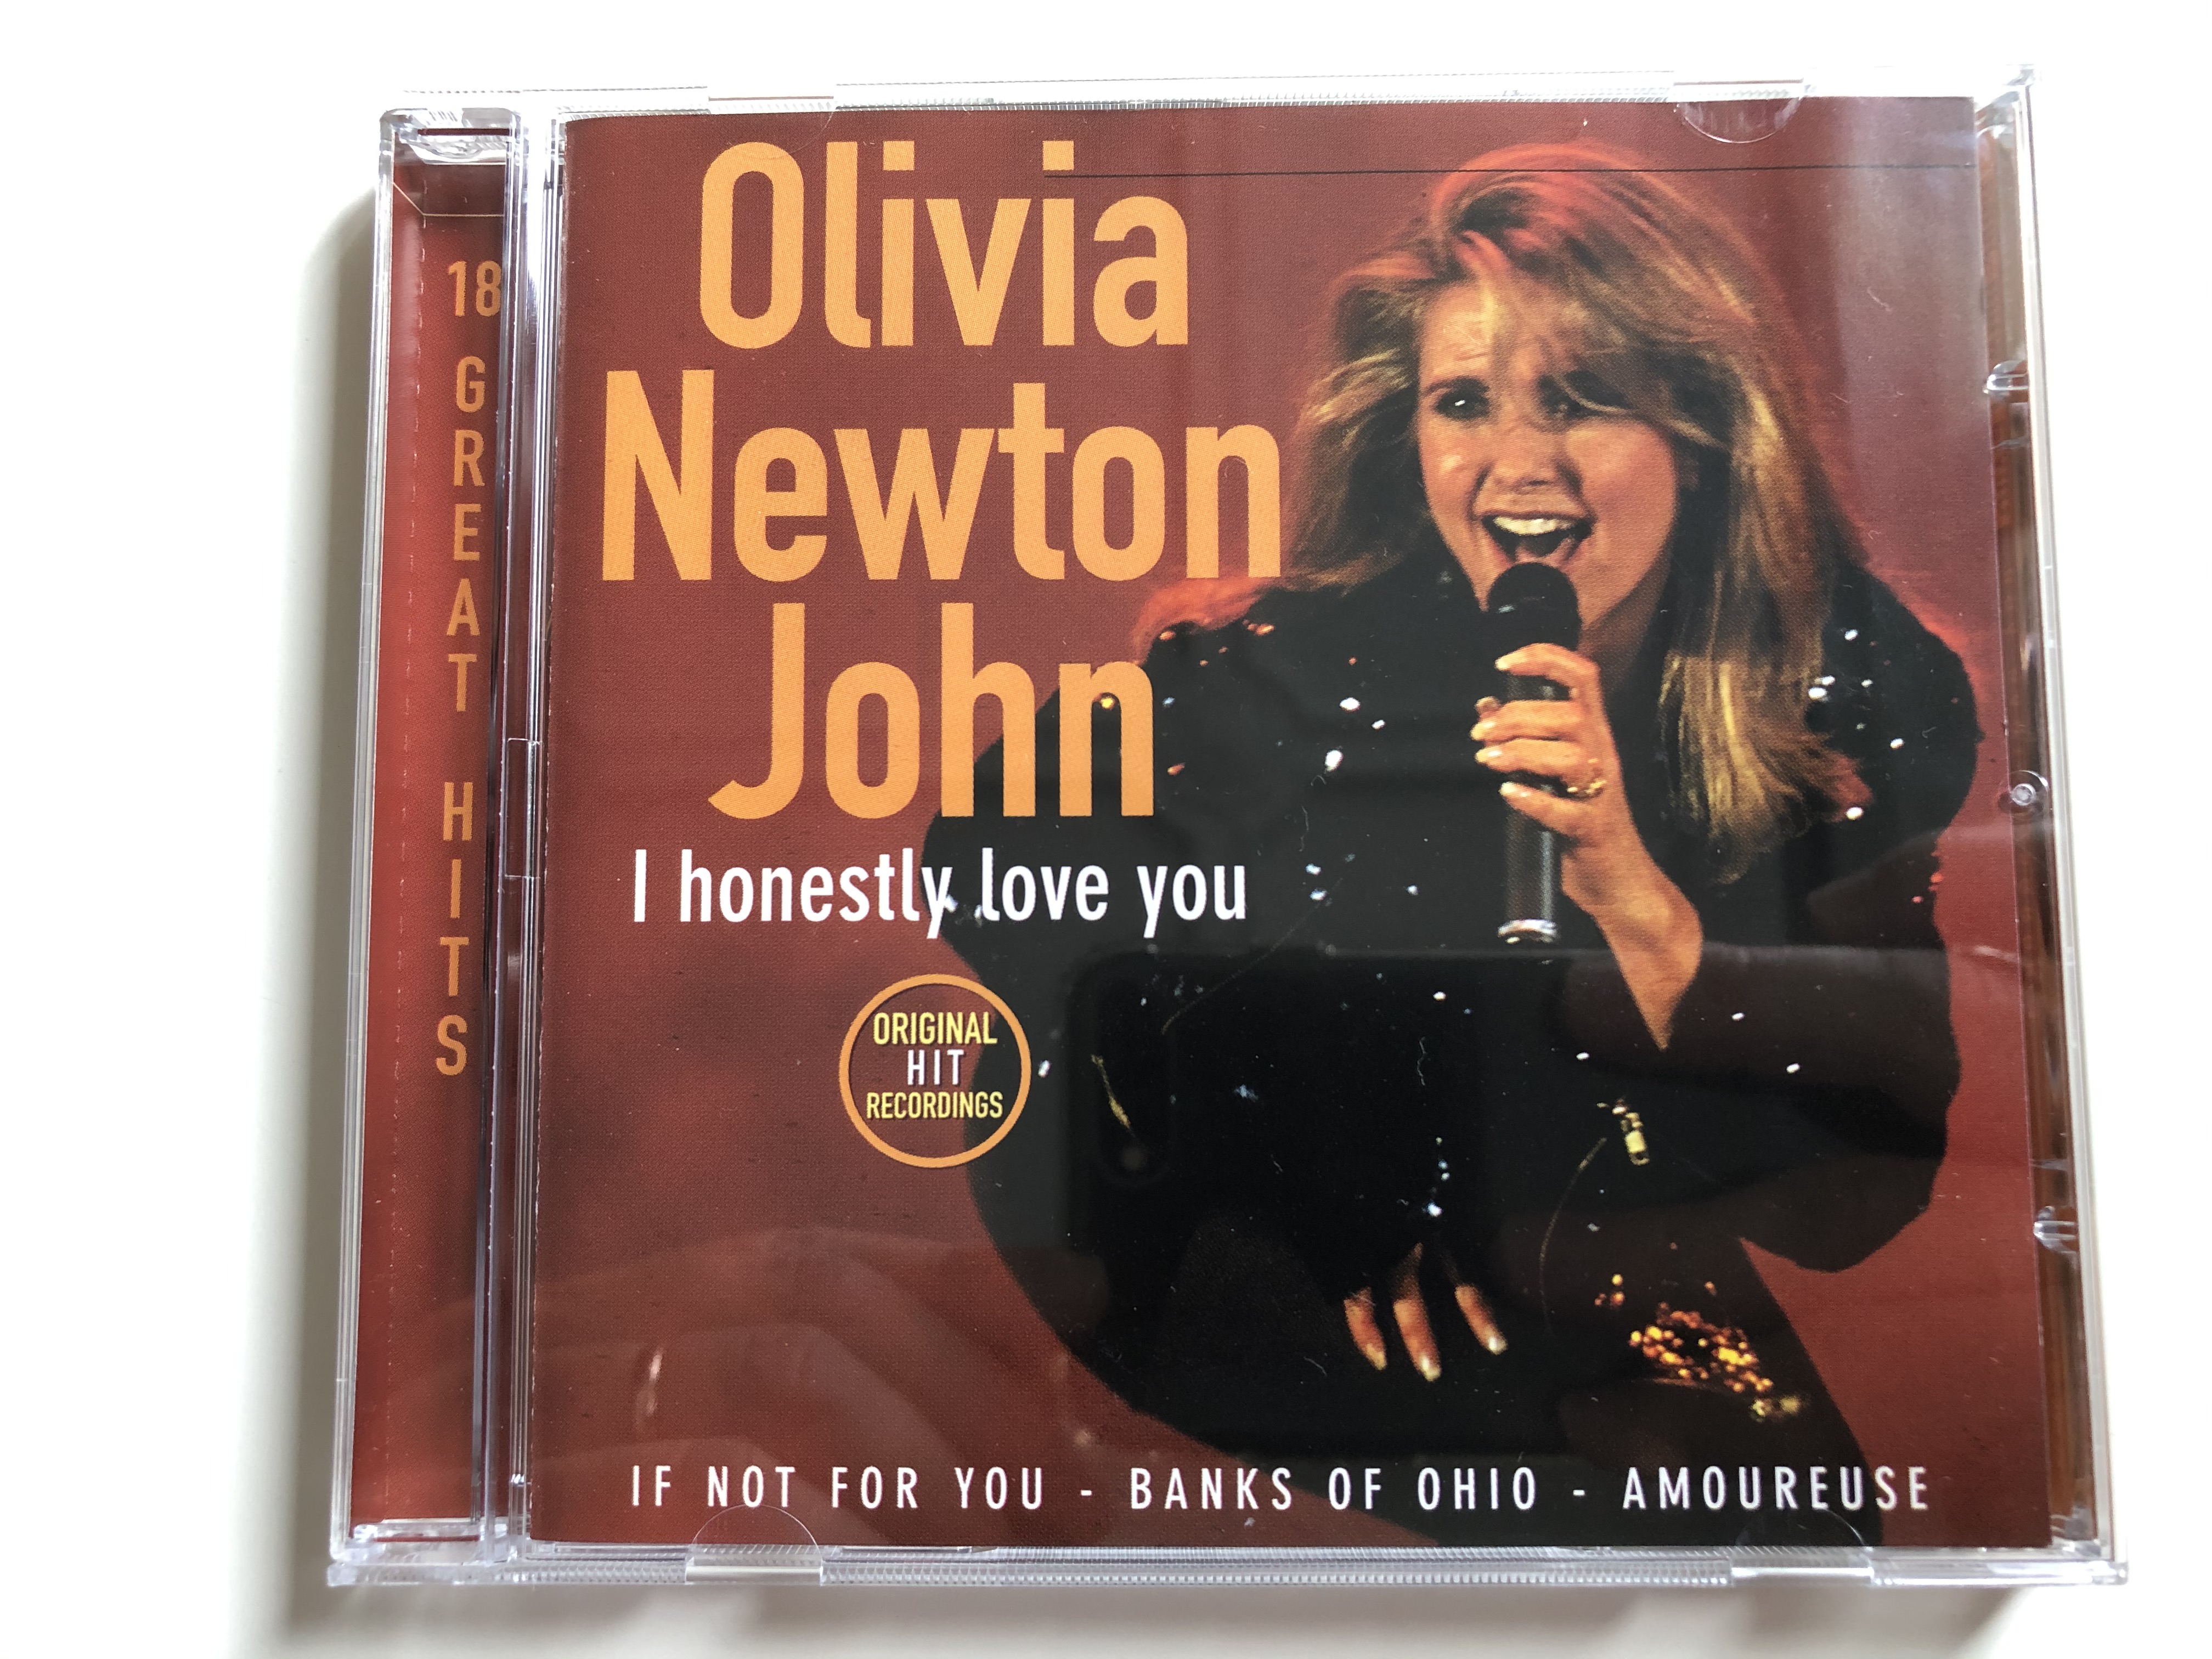 olivia-newton-john-i-honestly-love-you-18-great-hits-original-hit-recordings-if-not-for-you-banks-of-the-ohio-amoureuse-disky-audio-cd-1996-se-865722-1-.jpg